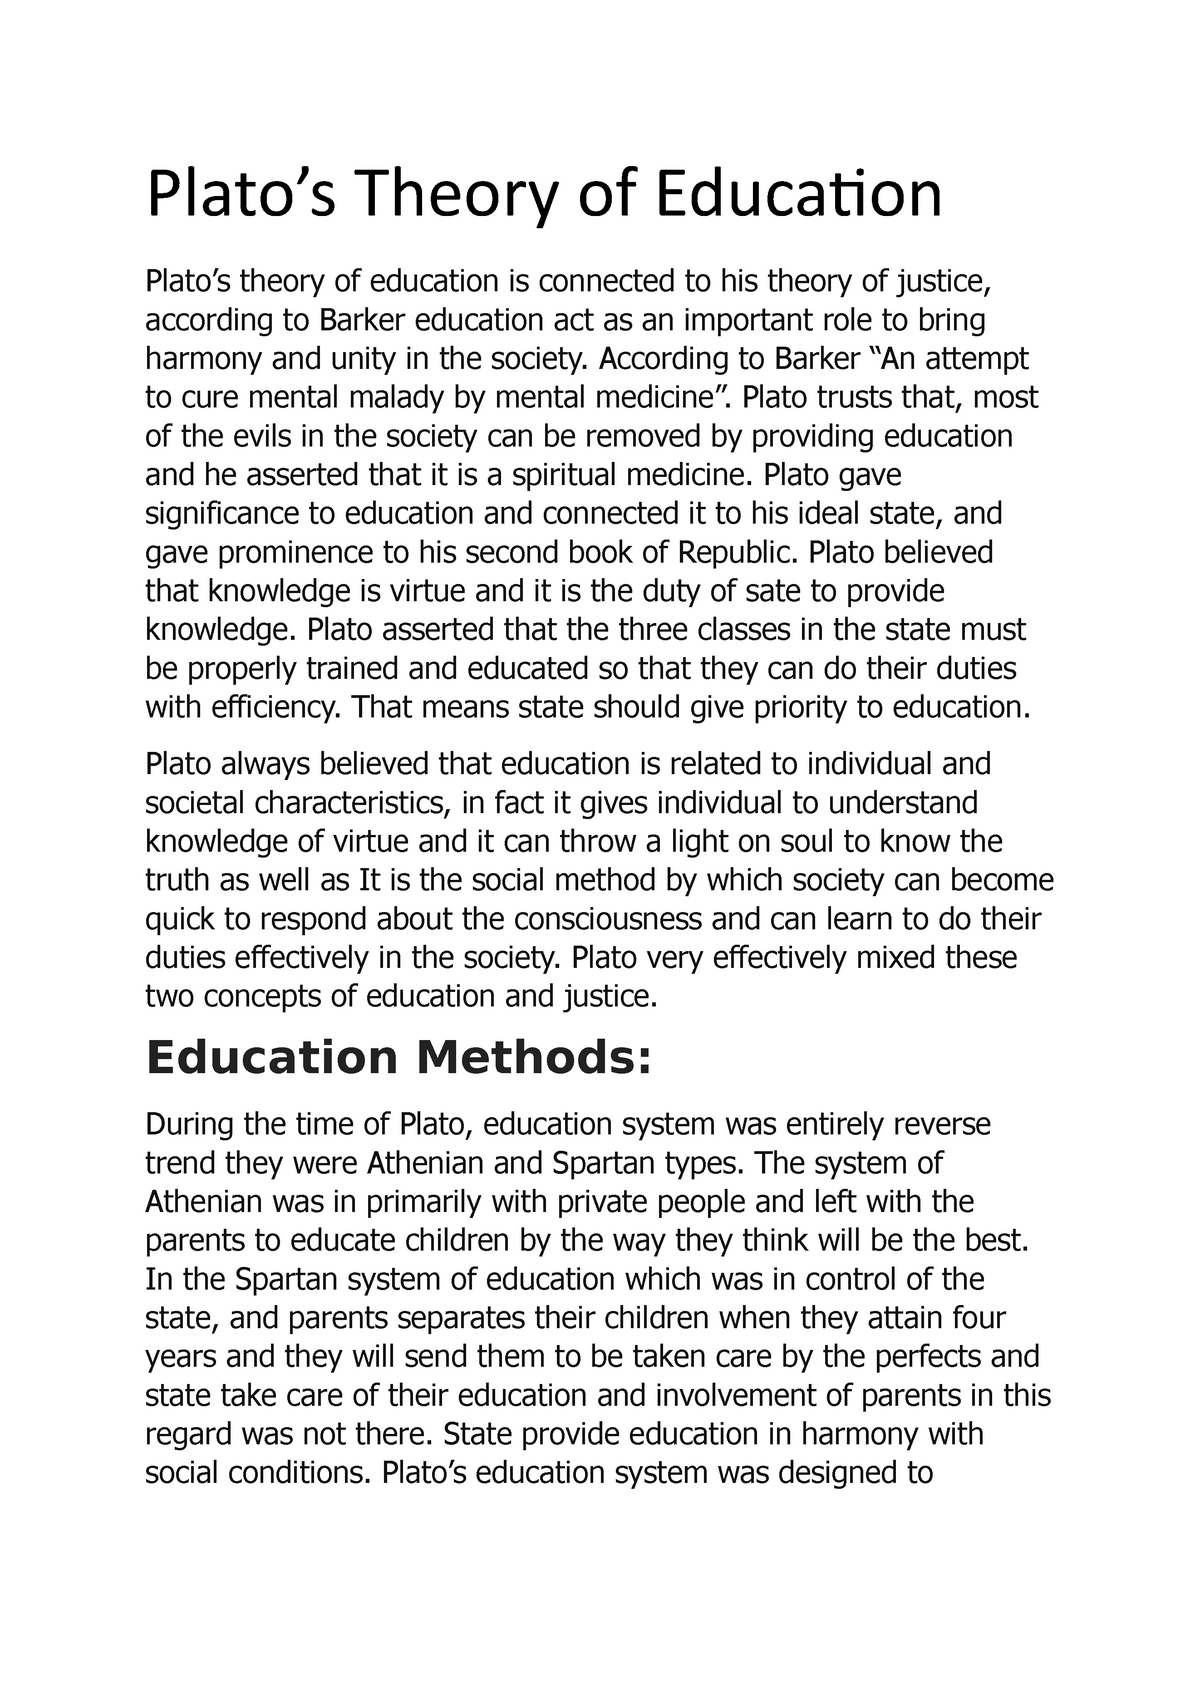 critically evaluate plato's theory of education